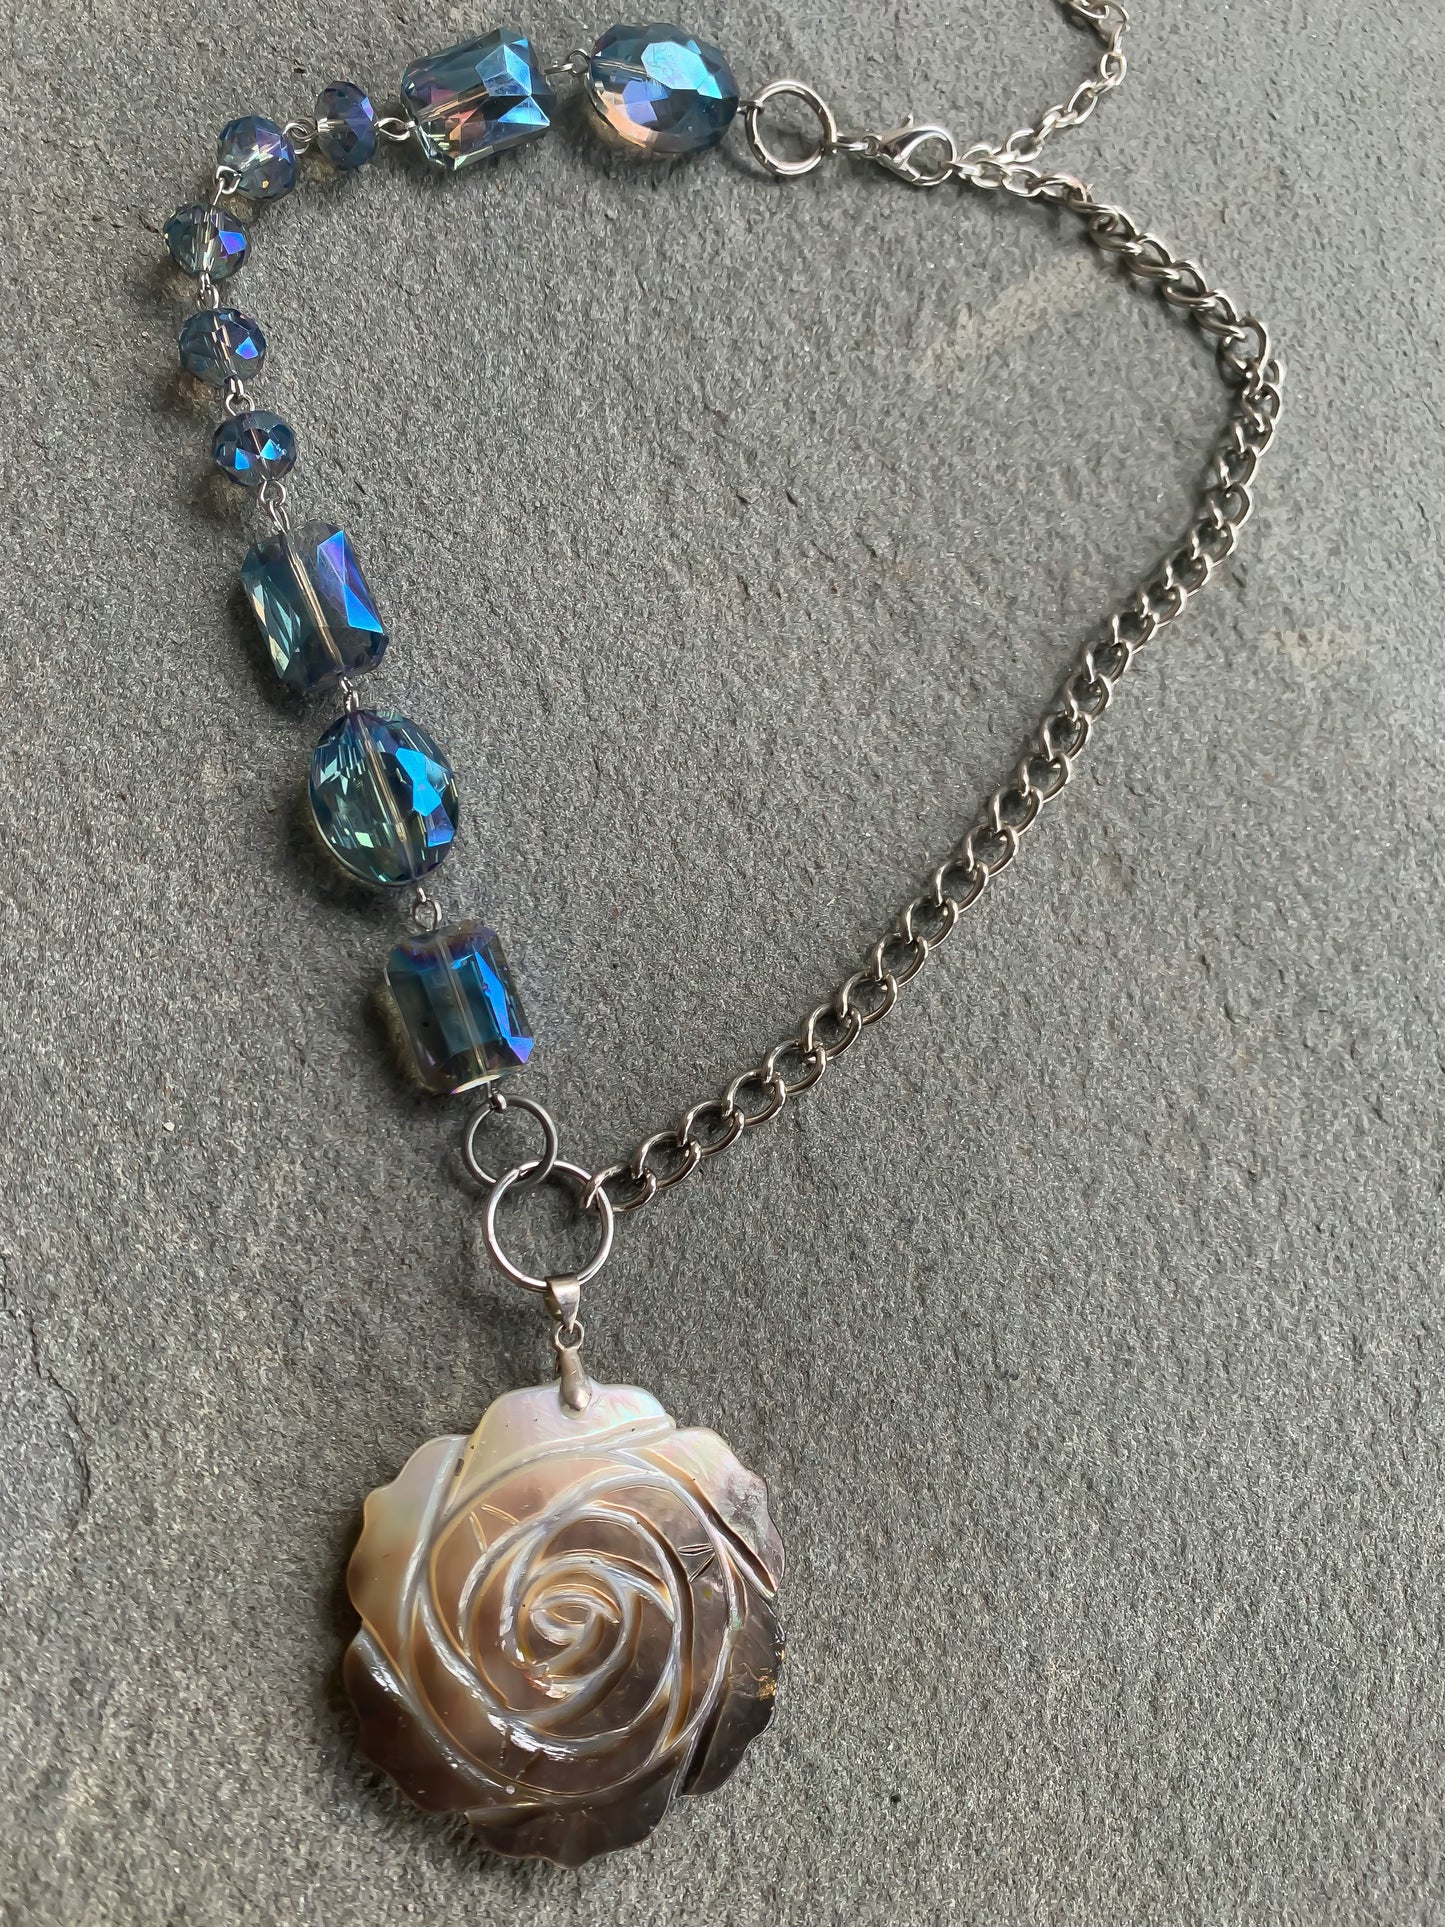 Rose Power Chain Necklace with Rainbow Beads